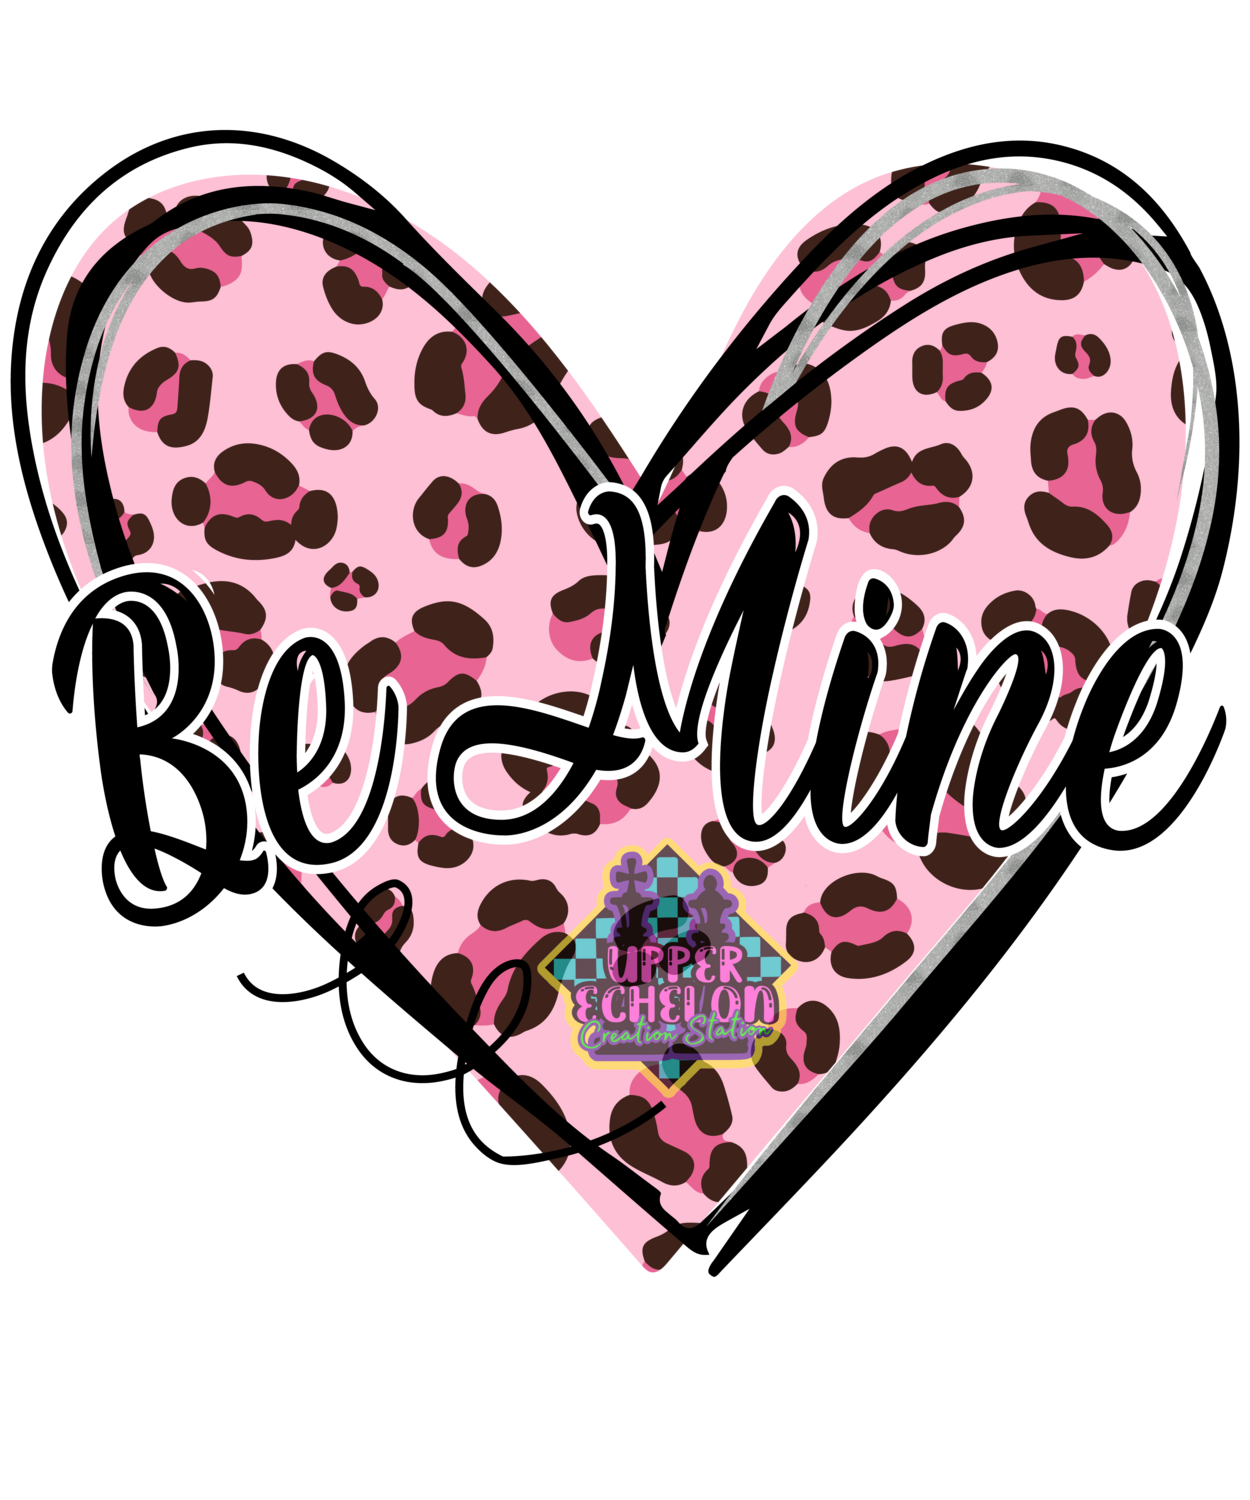 BE MINE - PINK HEART